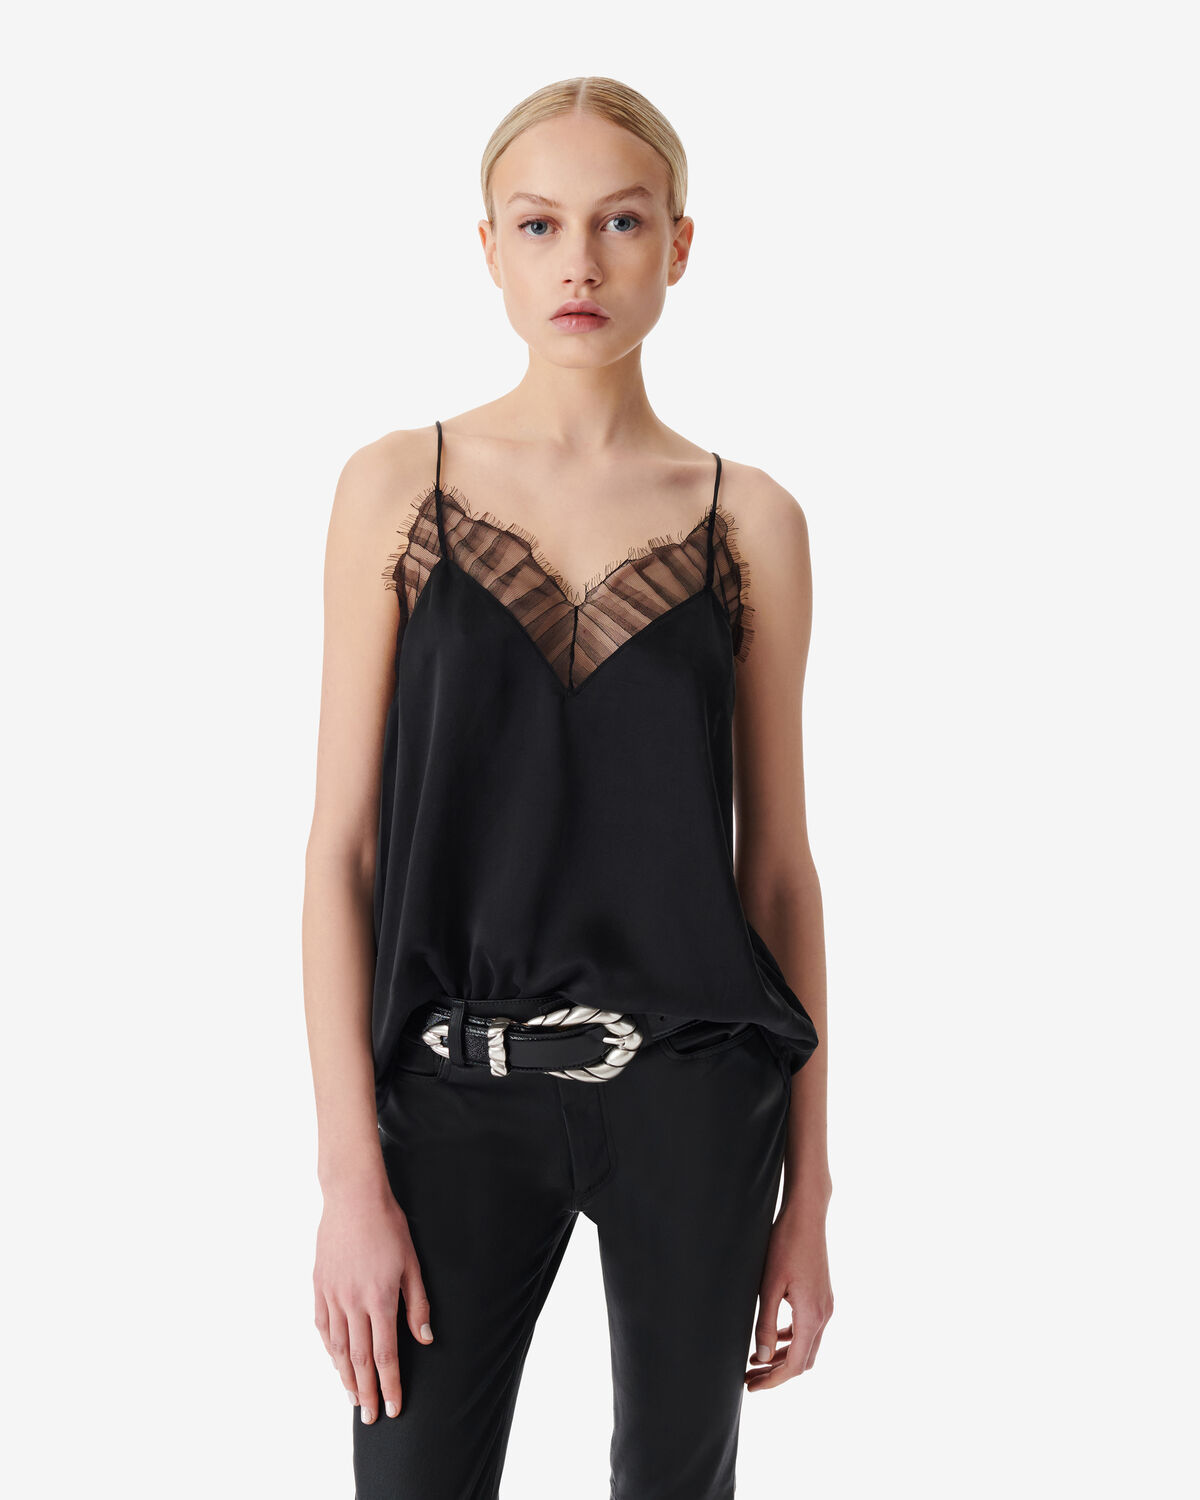 Photo of IRO Paris Berwyn Top Black - This Original Silk Top Is Characterized By Its Fluidity, Refinement And Lace Details. Play With Contrasts And Wear It With Jeans Or A Leather Skirt For A More Rocky Look. Shirts-Tops